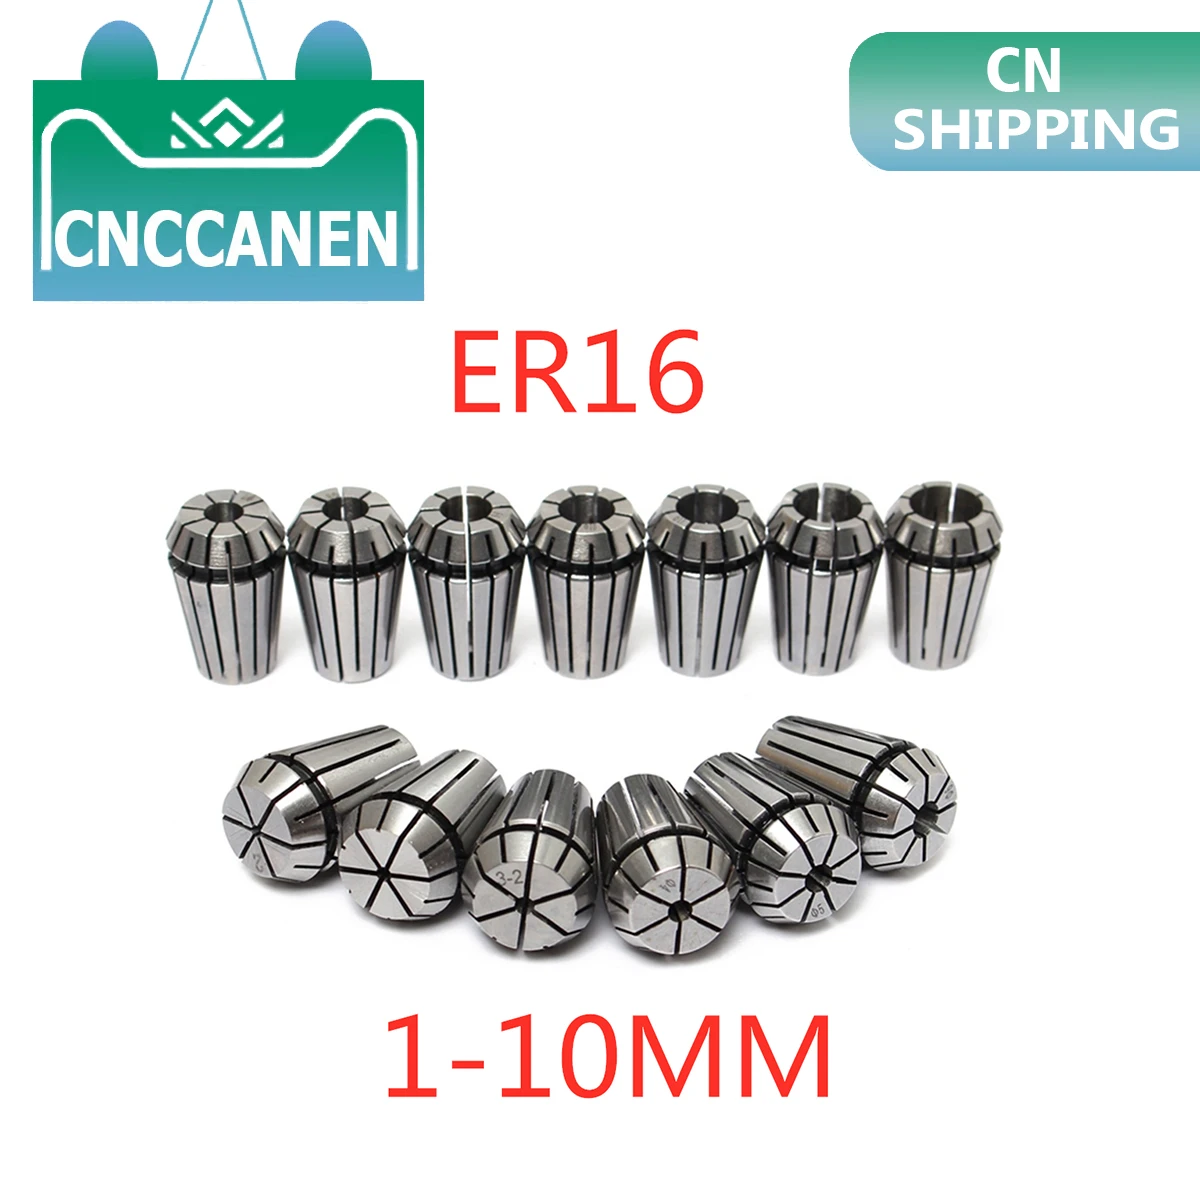 1PC ER16  1/4 6.35 1/8 3.175 1 2 3 4 5 6 7 8 9 10 mm Spring Collet Set For CNC Engraving Machine Lathe Mill Tool